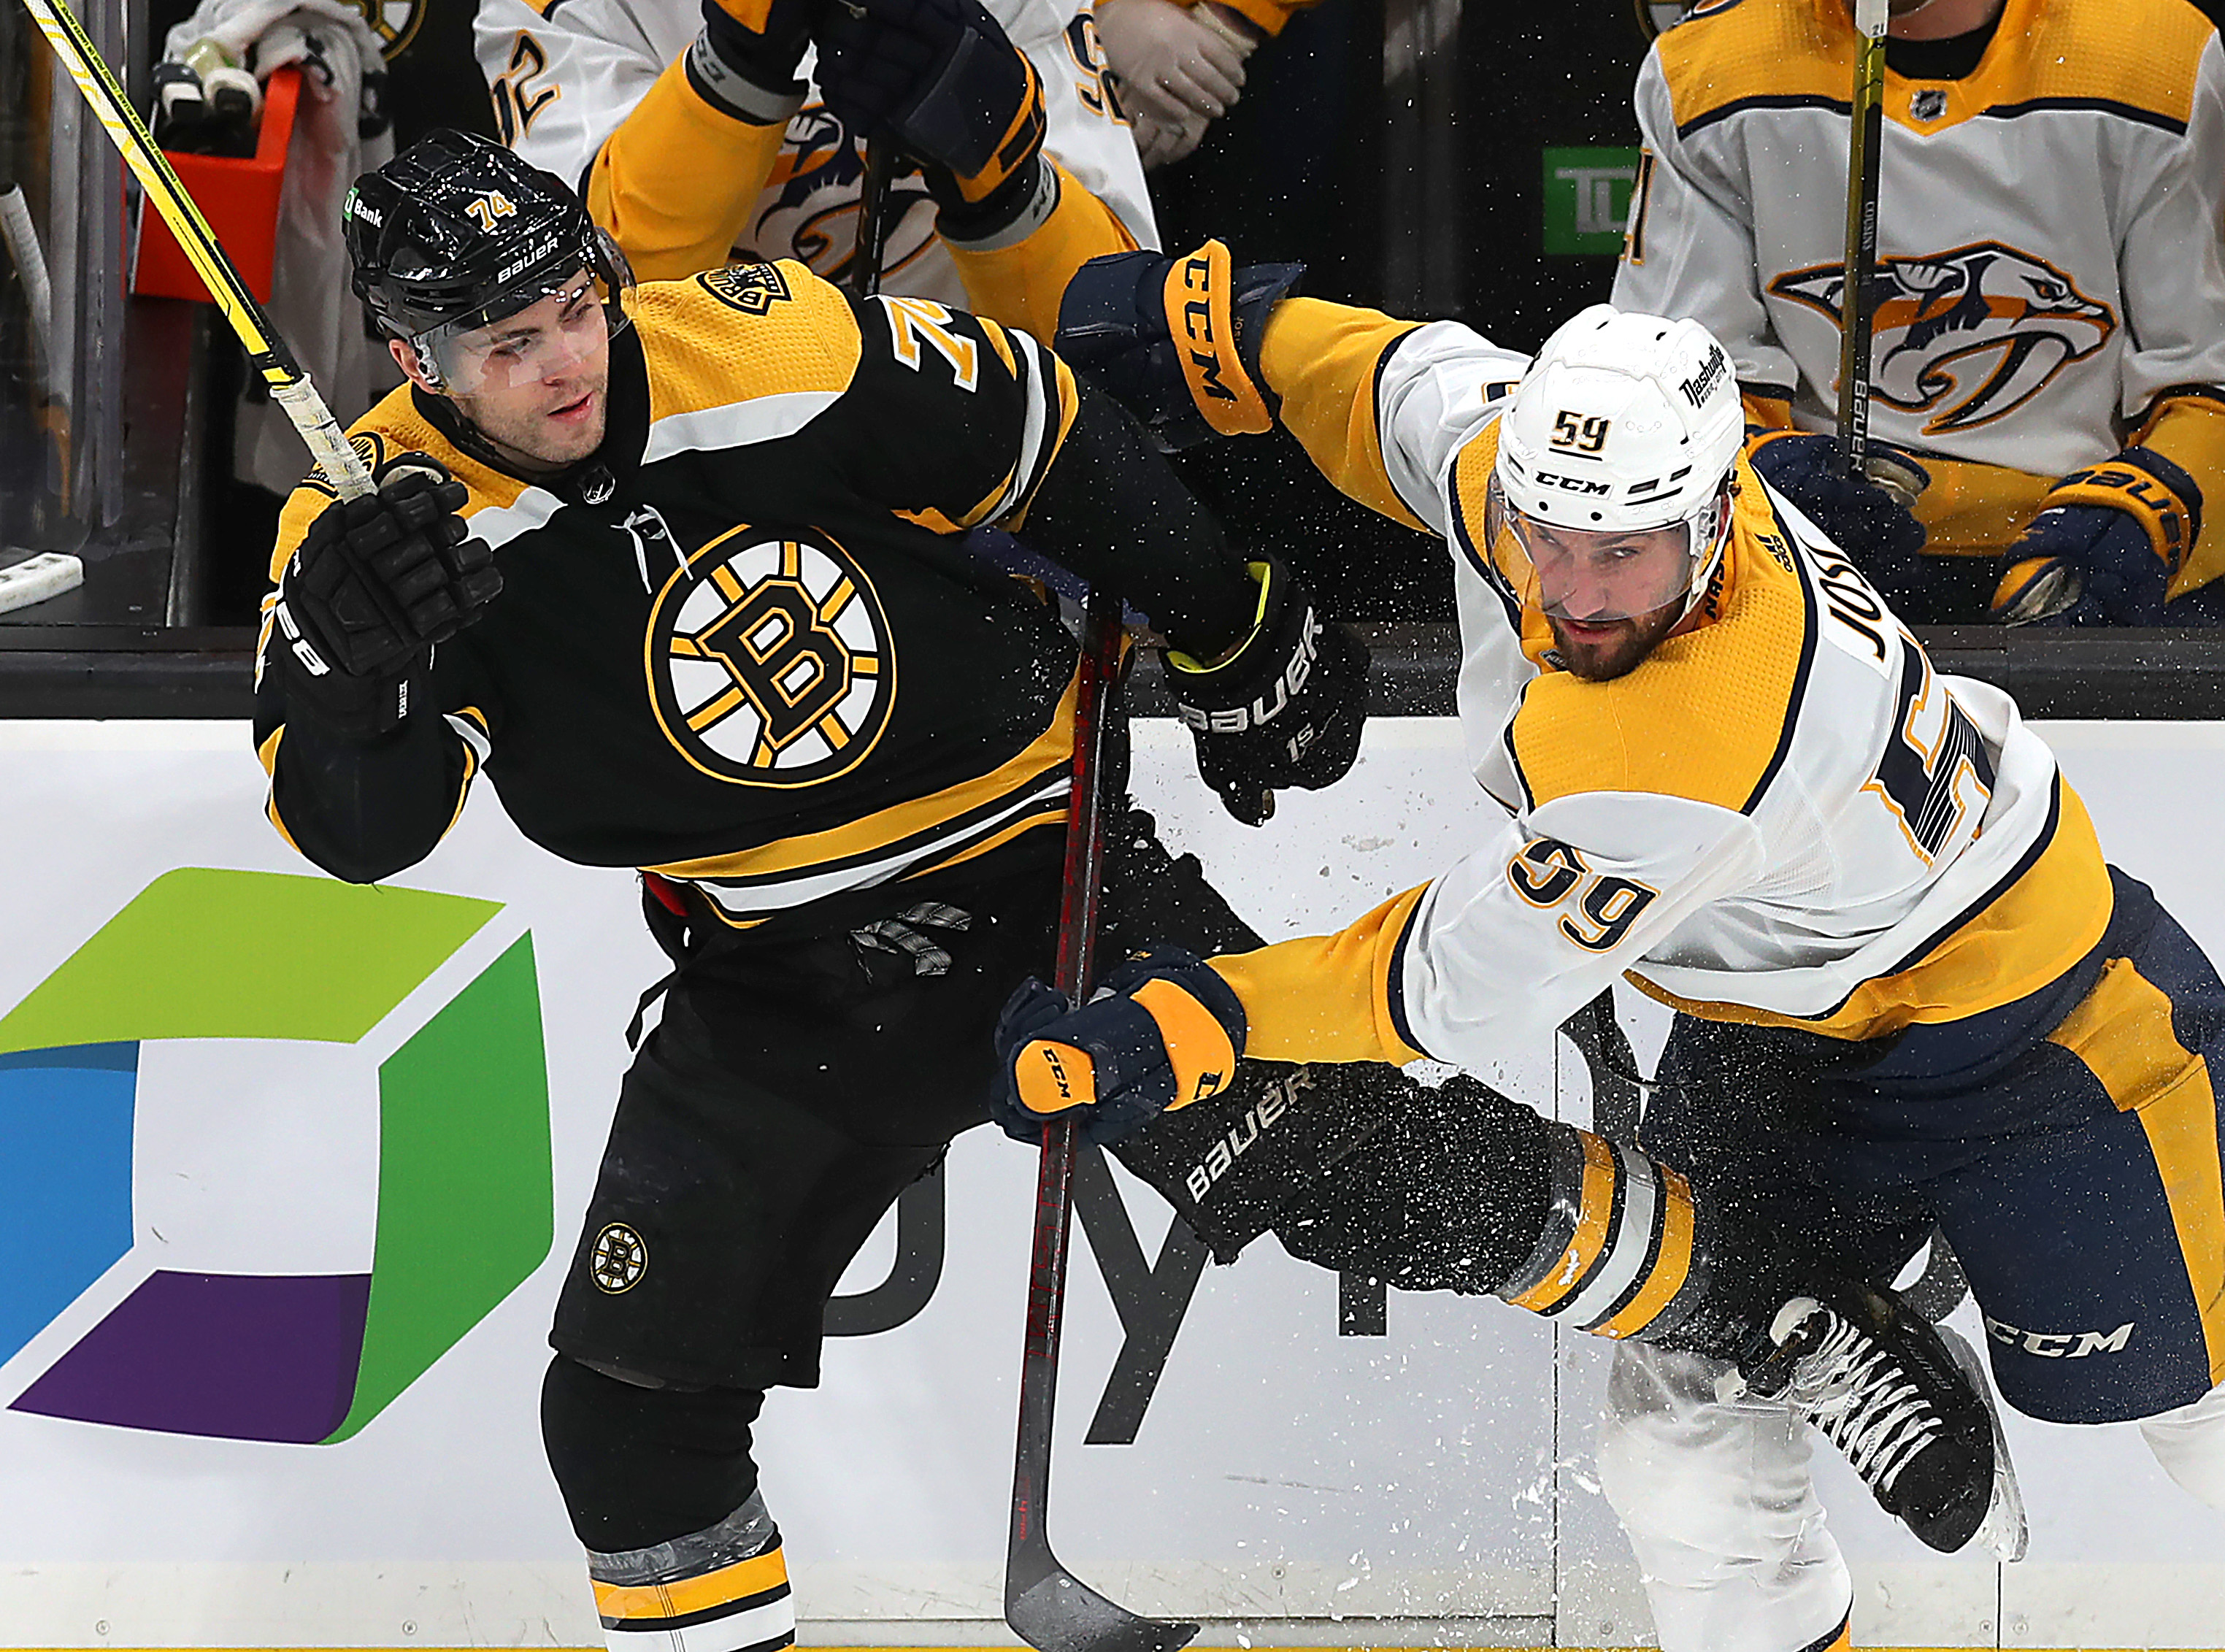 Jake DeBrusk expresses desire to stay with Boston Bruins and aims for 30- goal season - BVM Sports